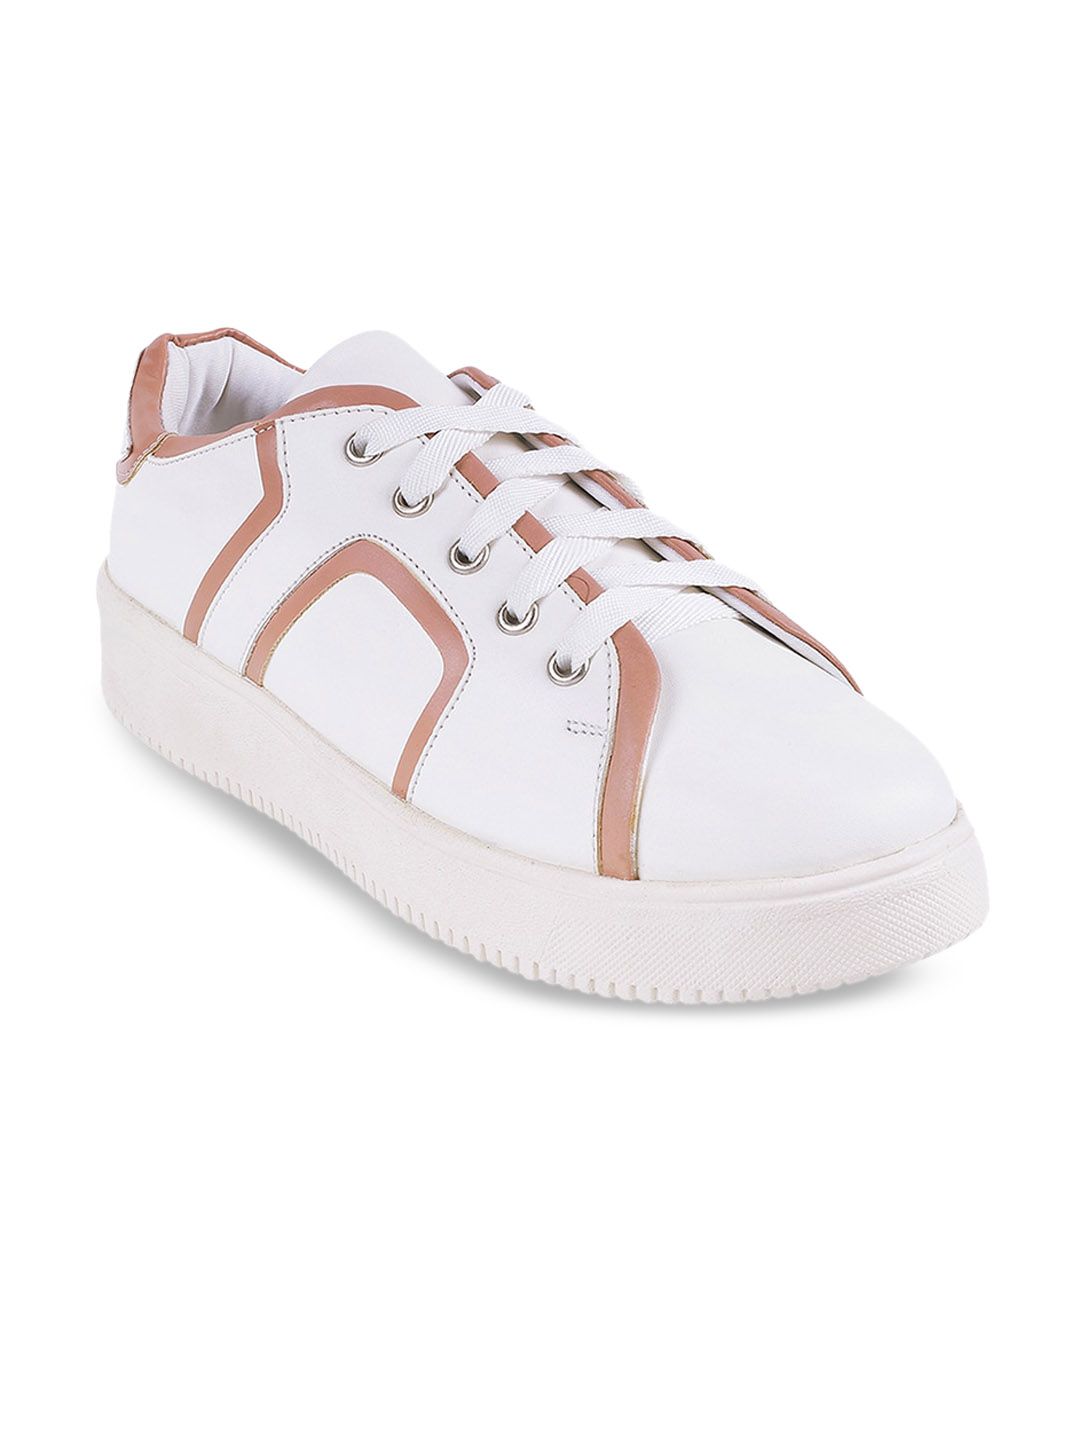 Mochi Women White & Peach Coloublocked Casual Shoes Price in India